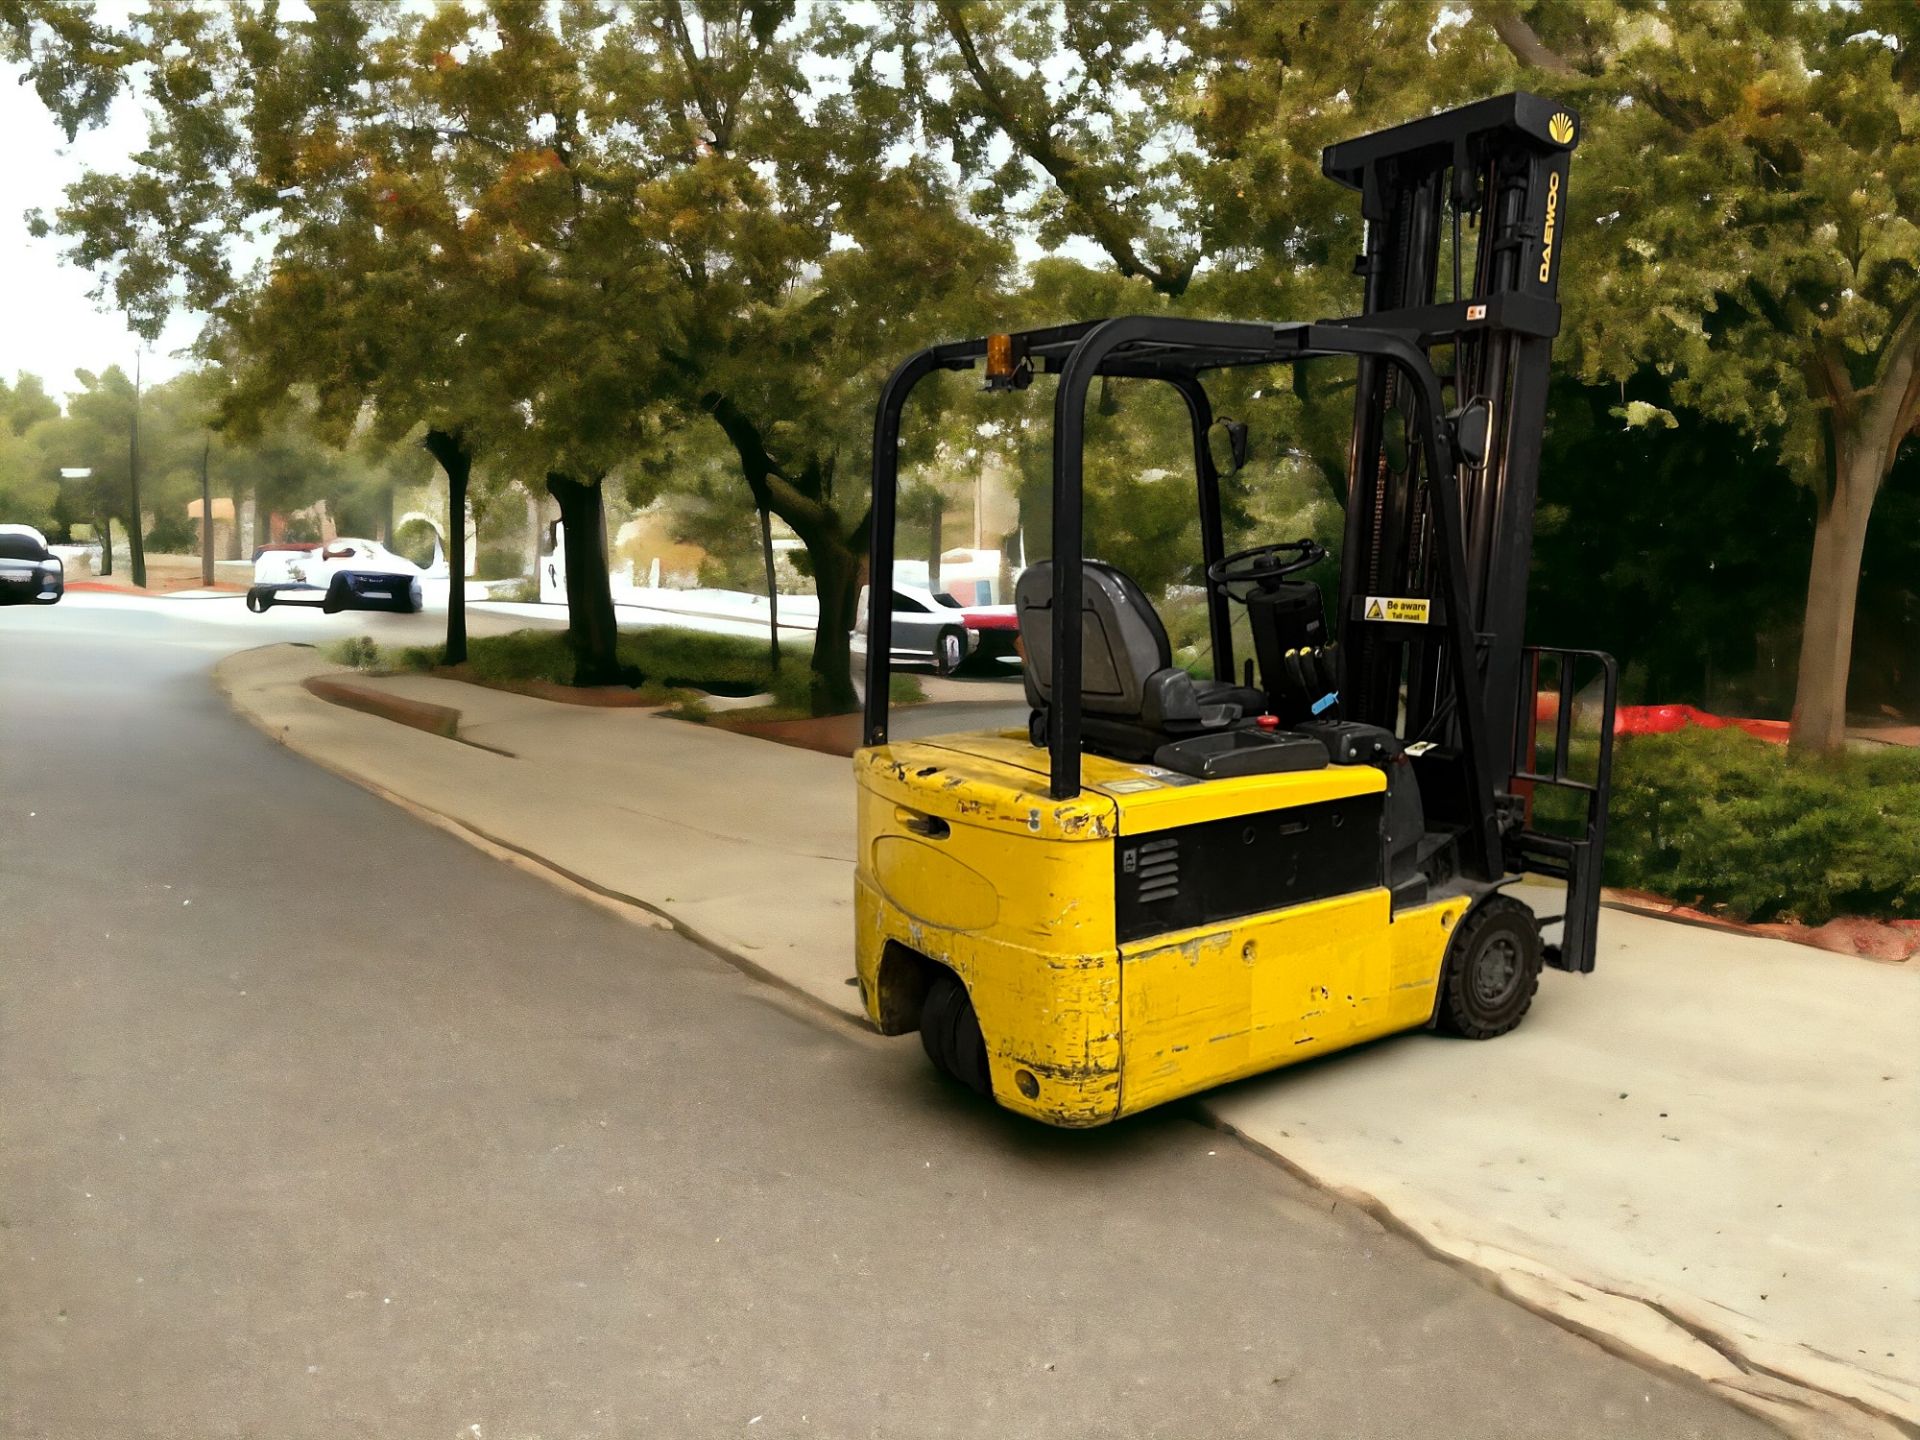 DAEWOO ELECTRIC 3-WHEEL FORKLIFT - MODEL B18T-2 (2002) **(INCLUDES CHARGER)** - Image 6 of 6